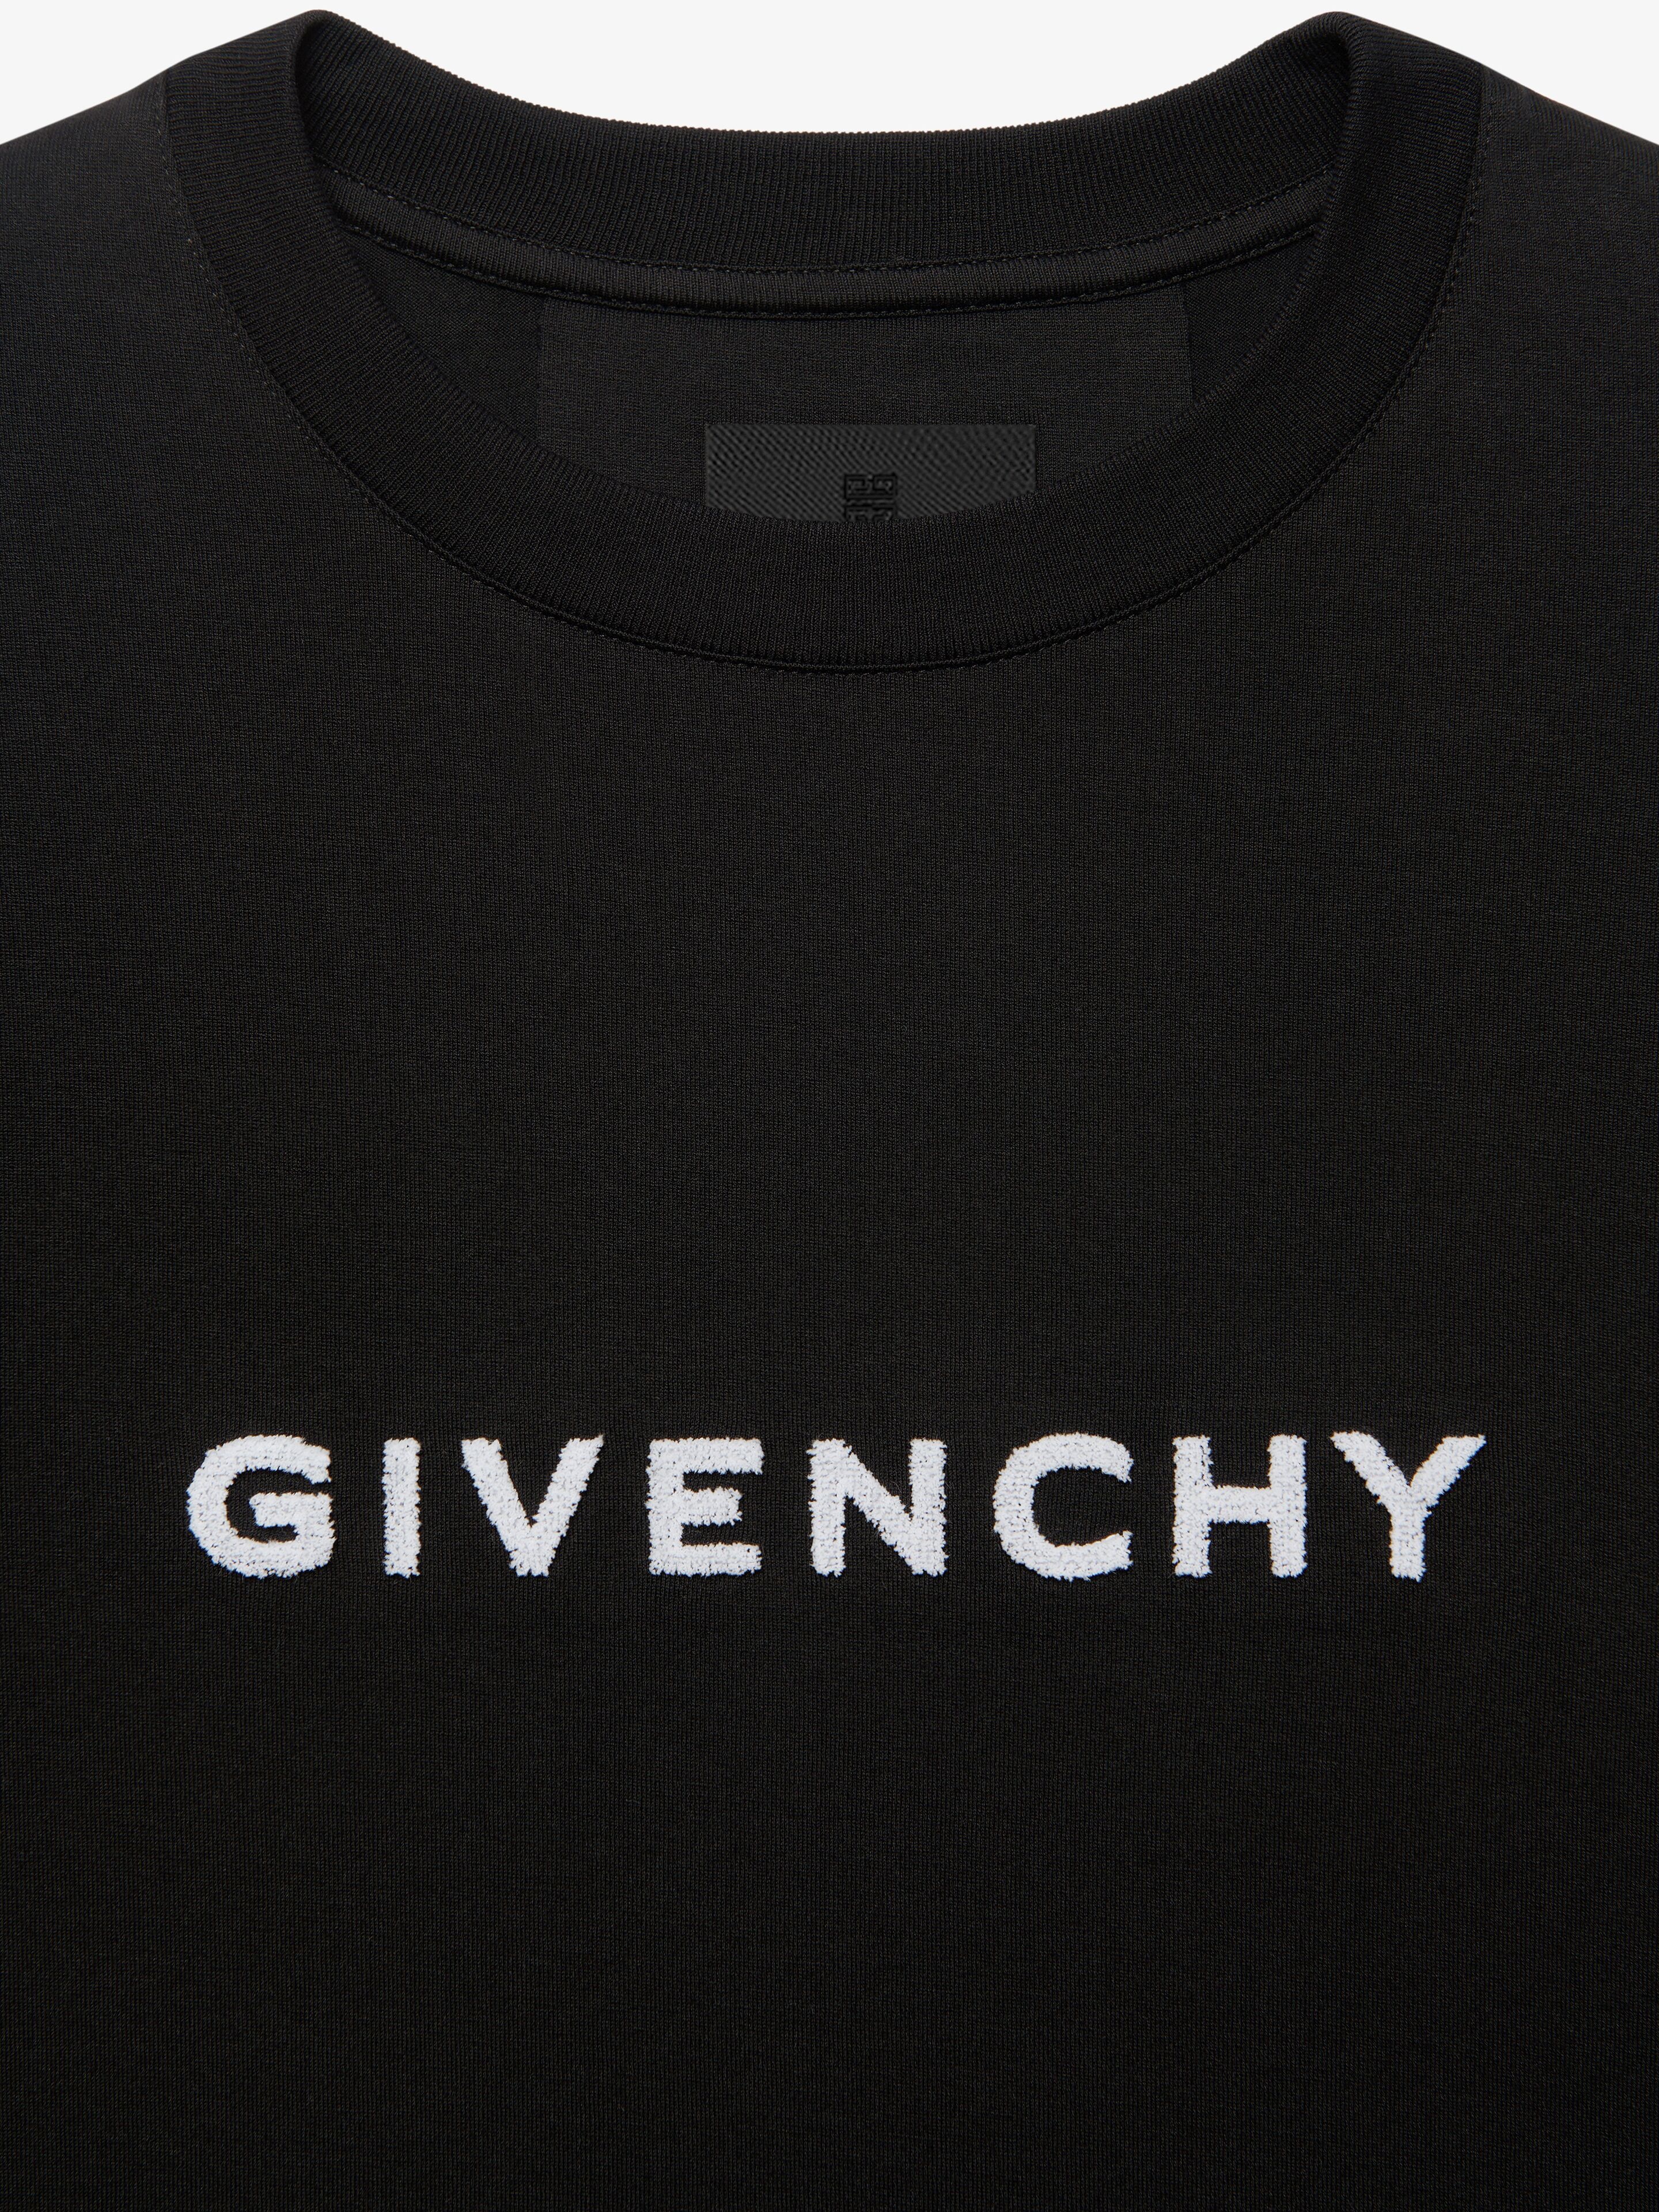 GIVENCHY 4G T-SHIRT IN COTTON - 6